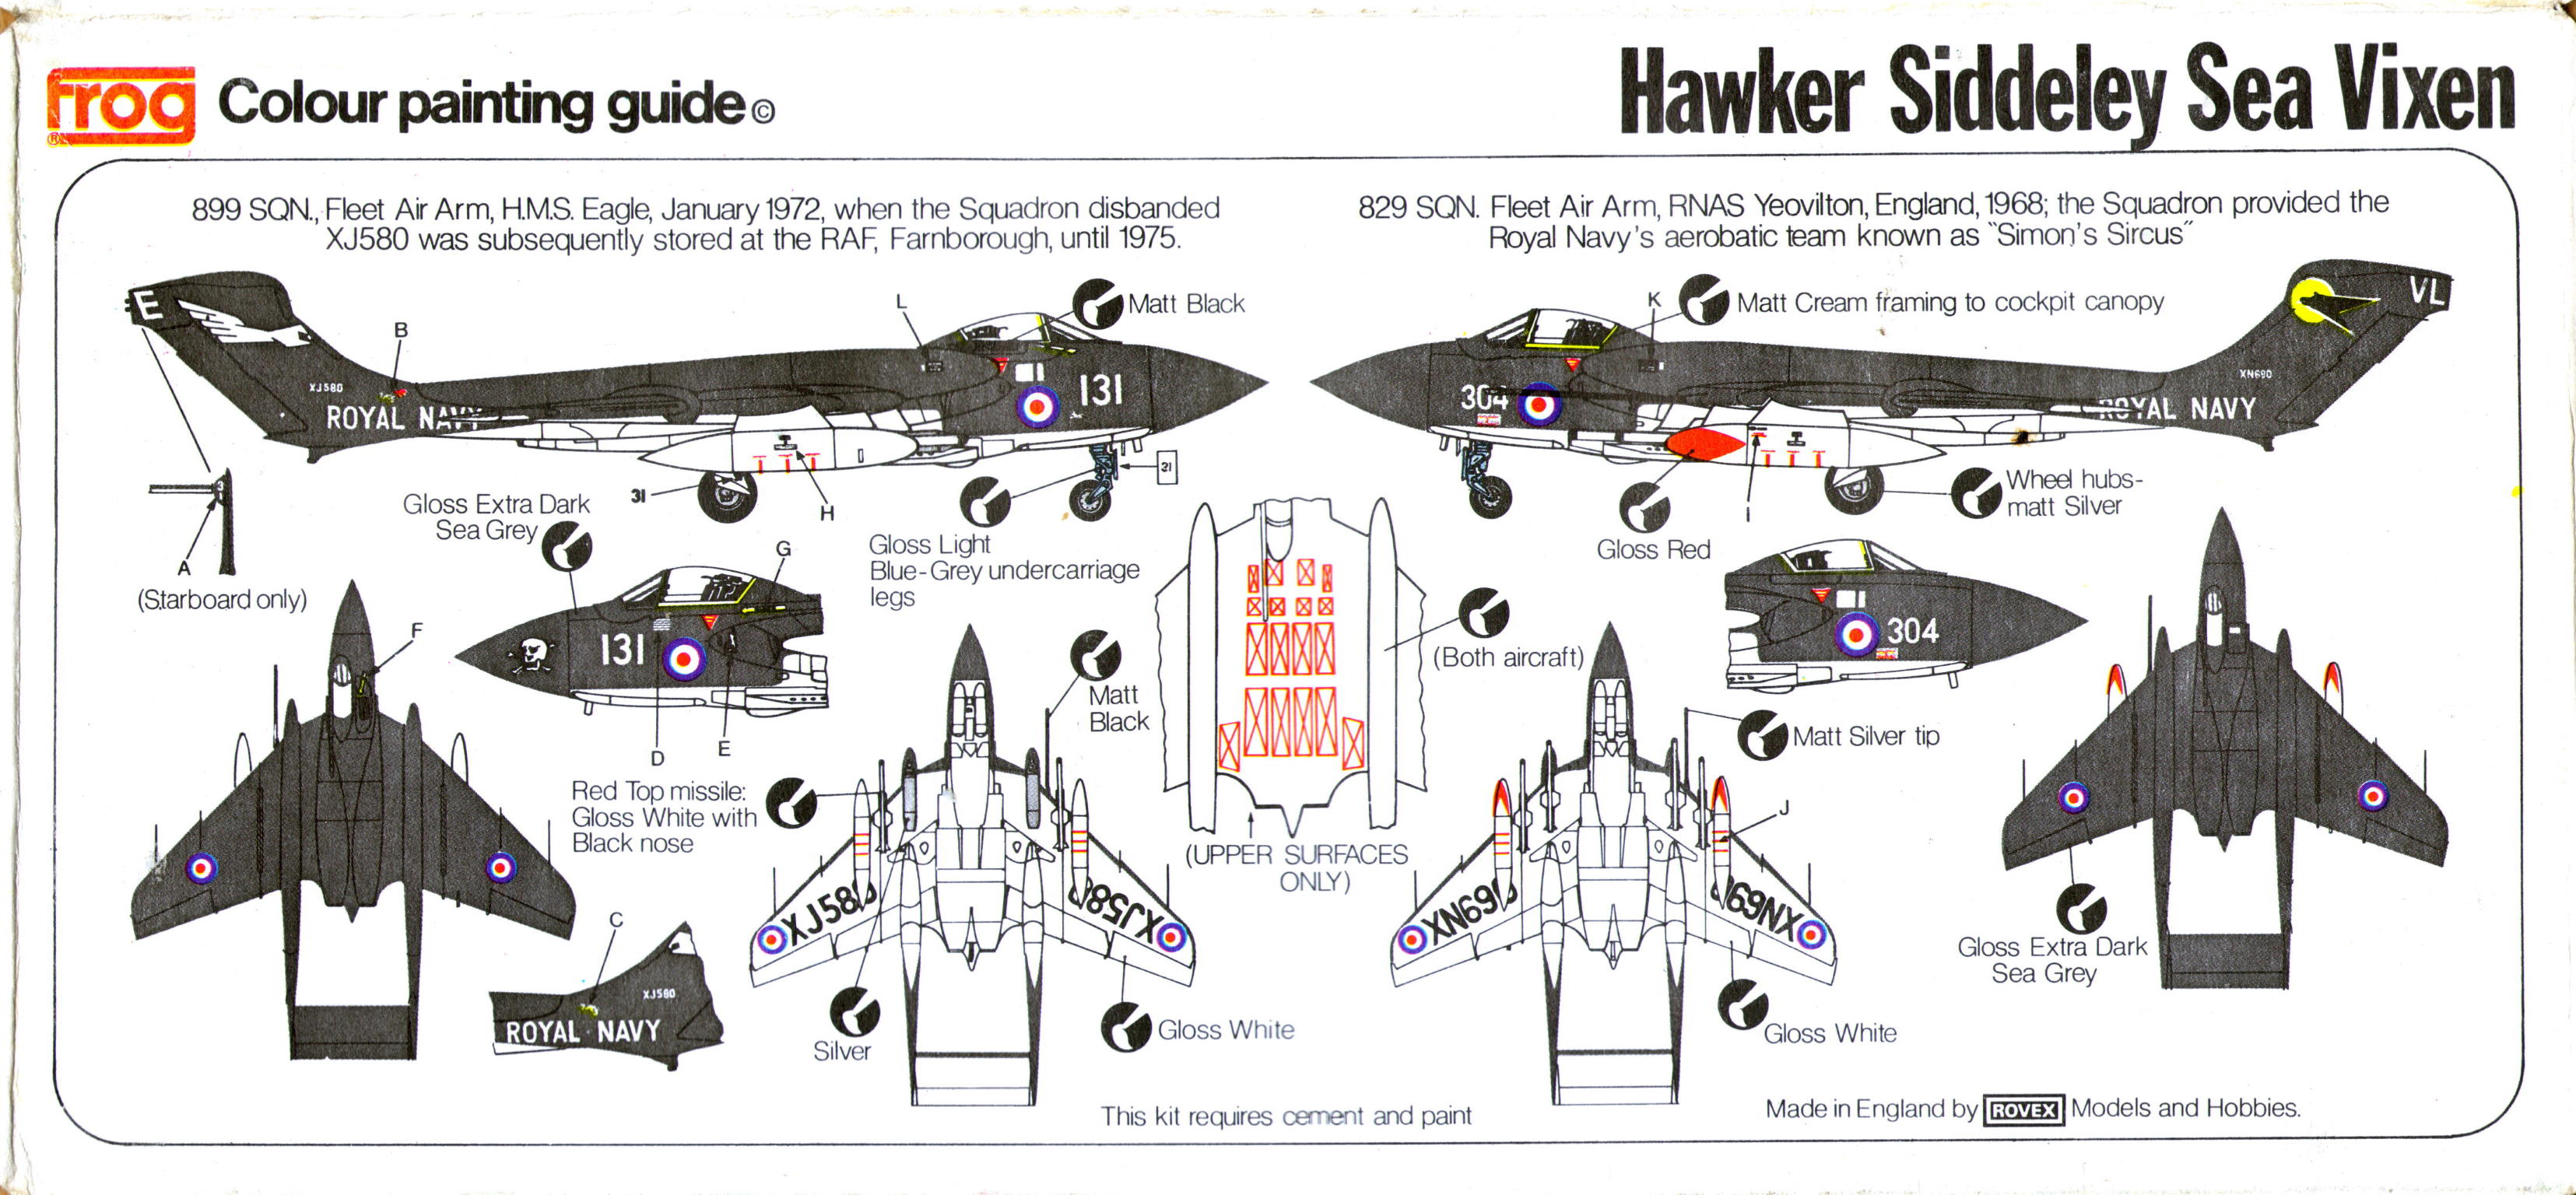 Colour painting guide FROG F409 Orange Series Sea Vixen FAW.Mk.2 Strike Fighter, ROVEX Models and Hobbies, 1976